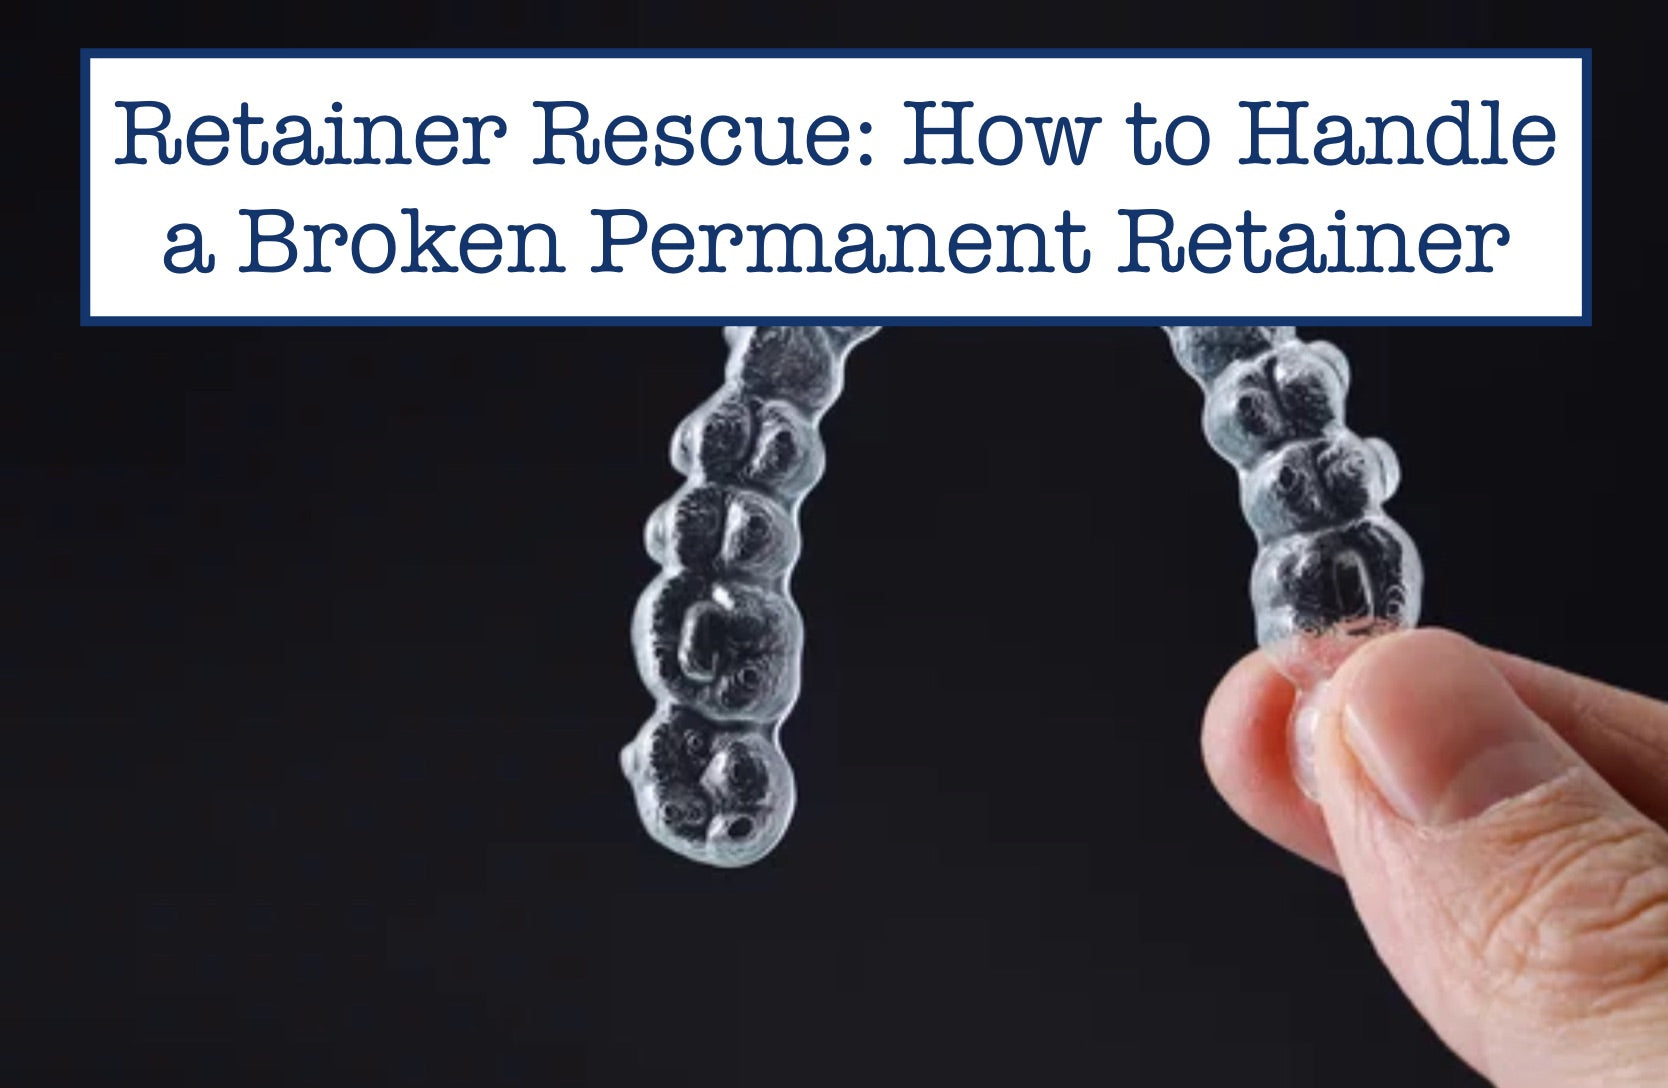 Retainer Rescue: How to Handle a Broken Permanent Retainer